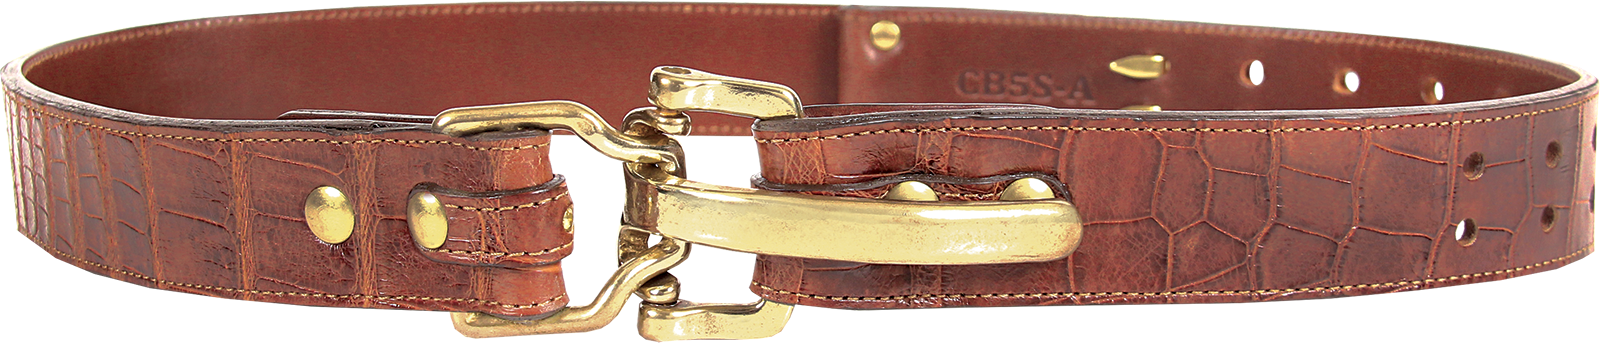 Brown American Alligator men's belt size small with brass cinch style front buckle.